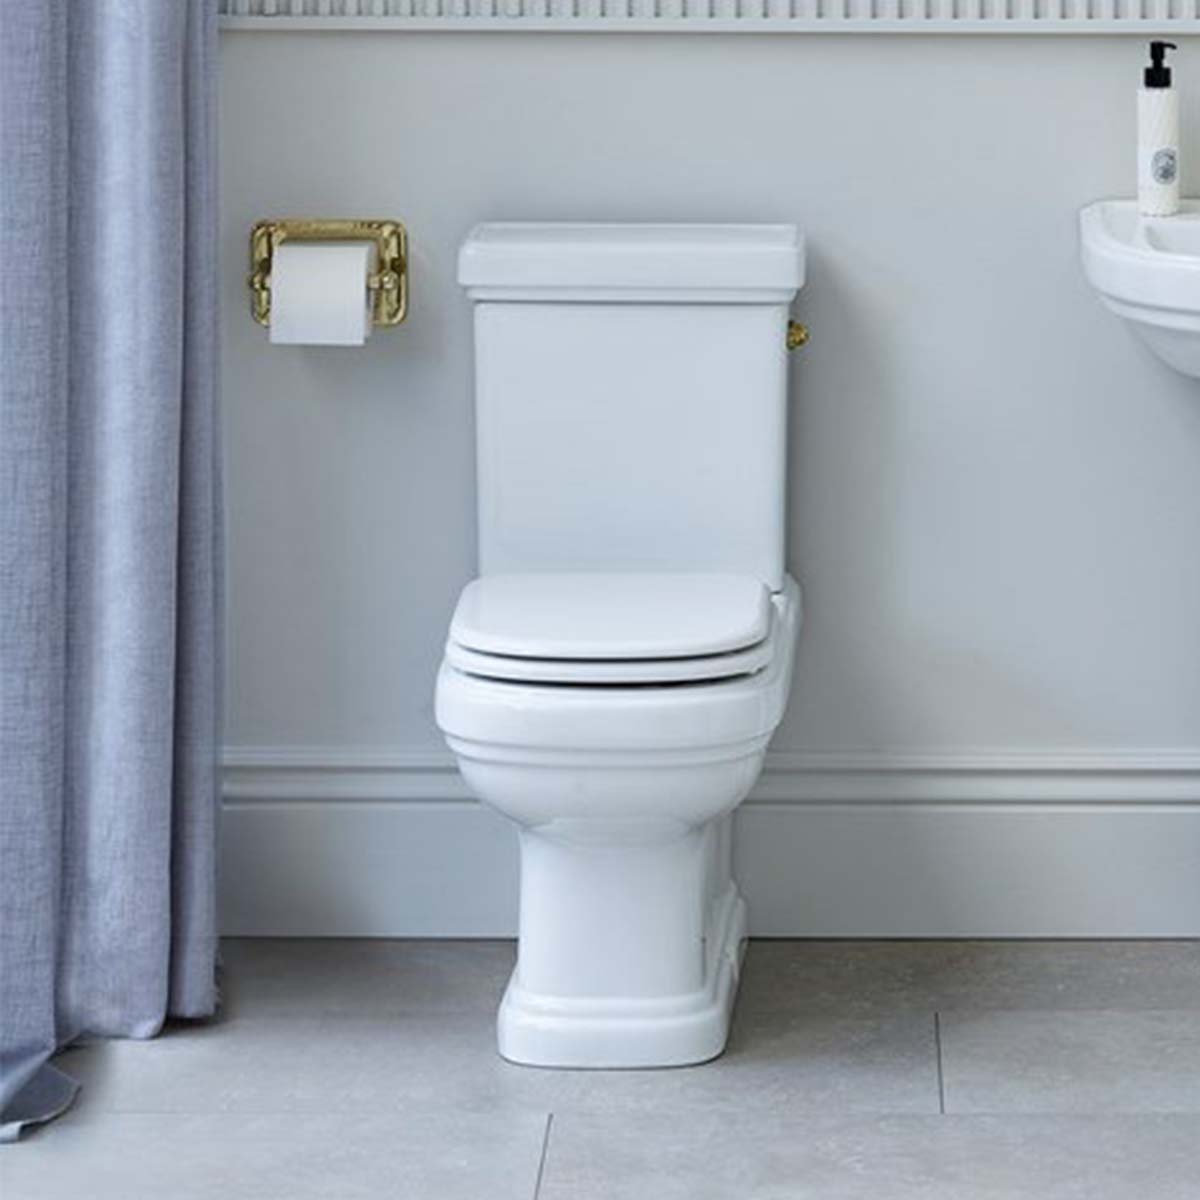 burlington riviera close coupled full back to wall wc toilet lifestyle Deluxe Bathrooms UK